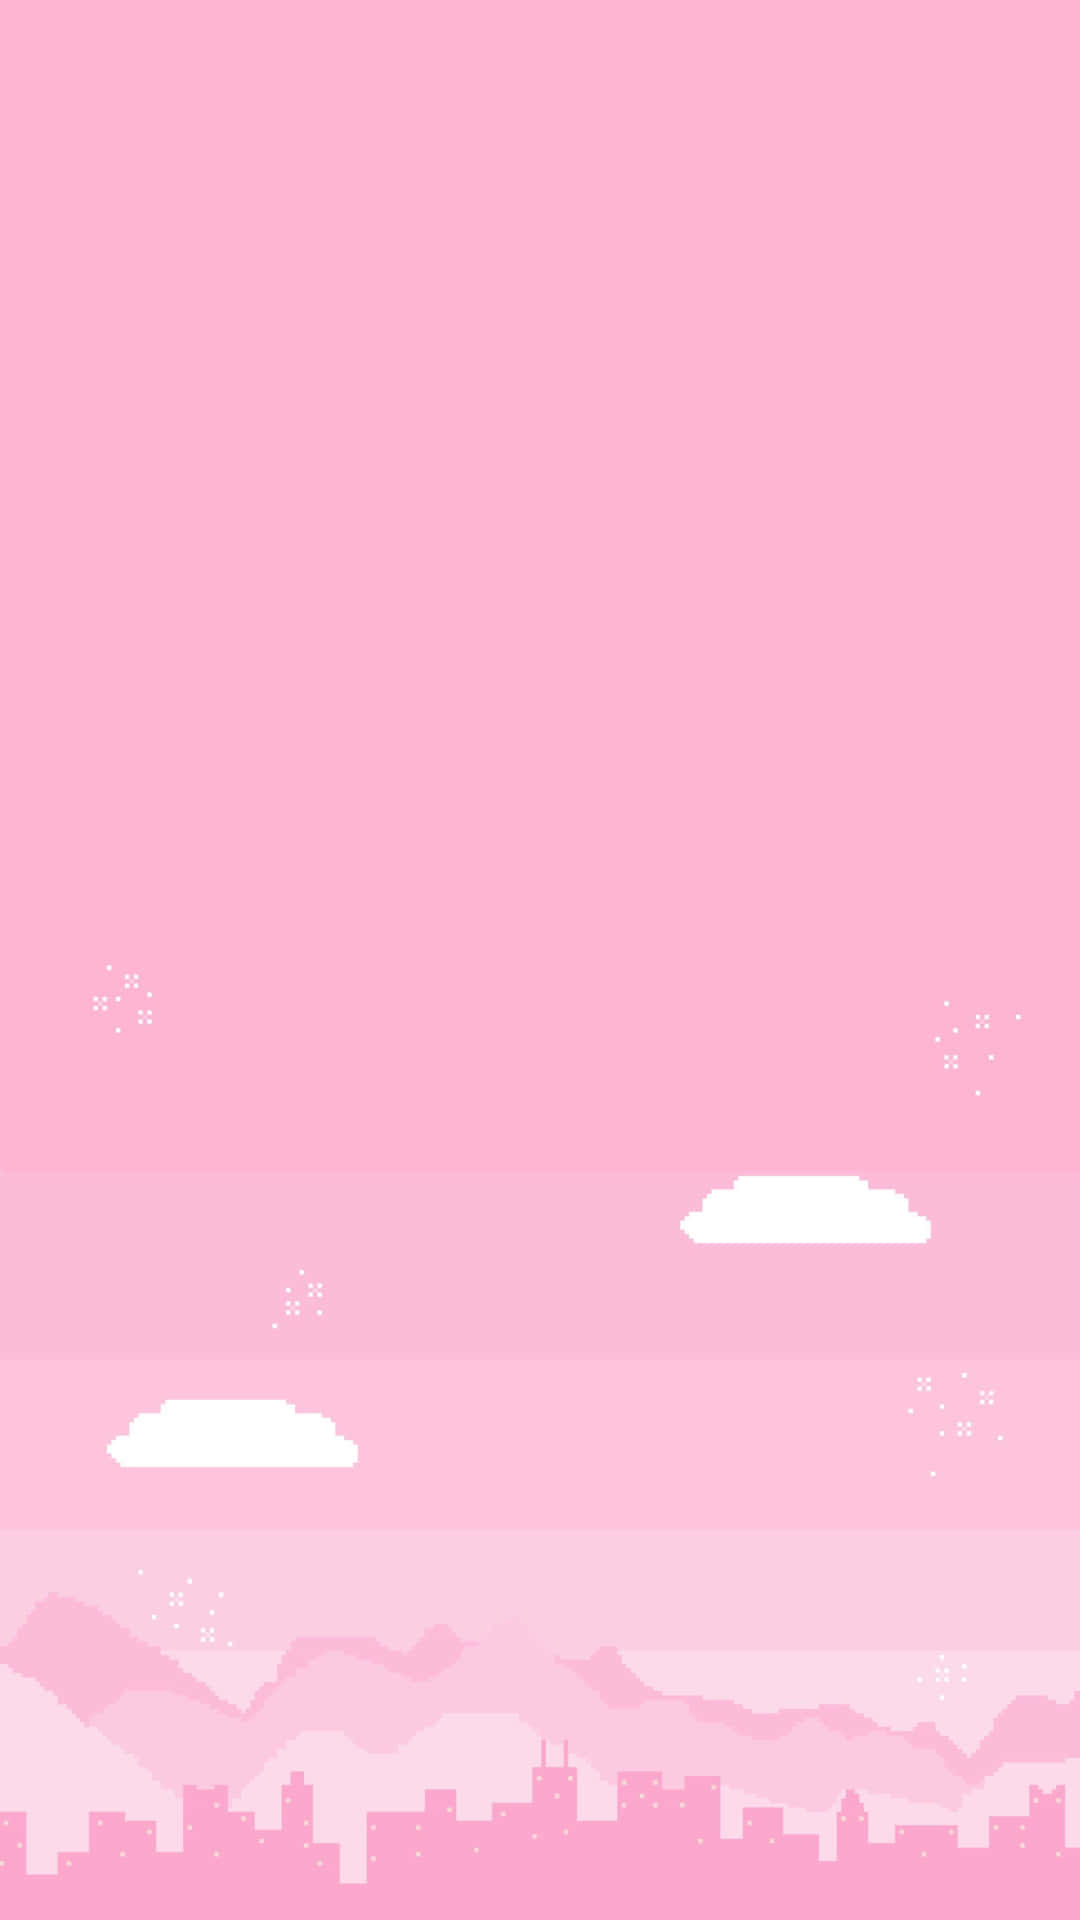 Aesthetic City Pastel Pink Background